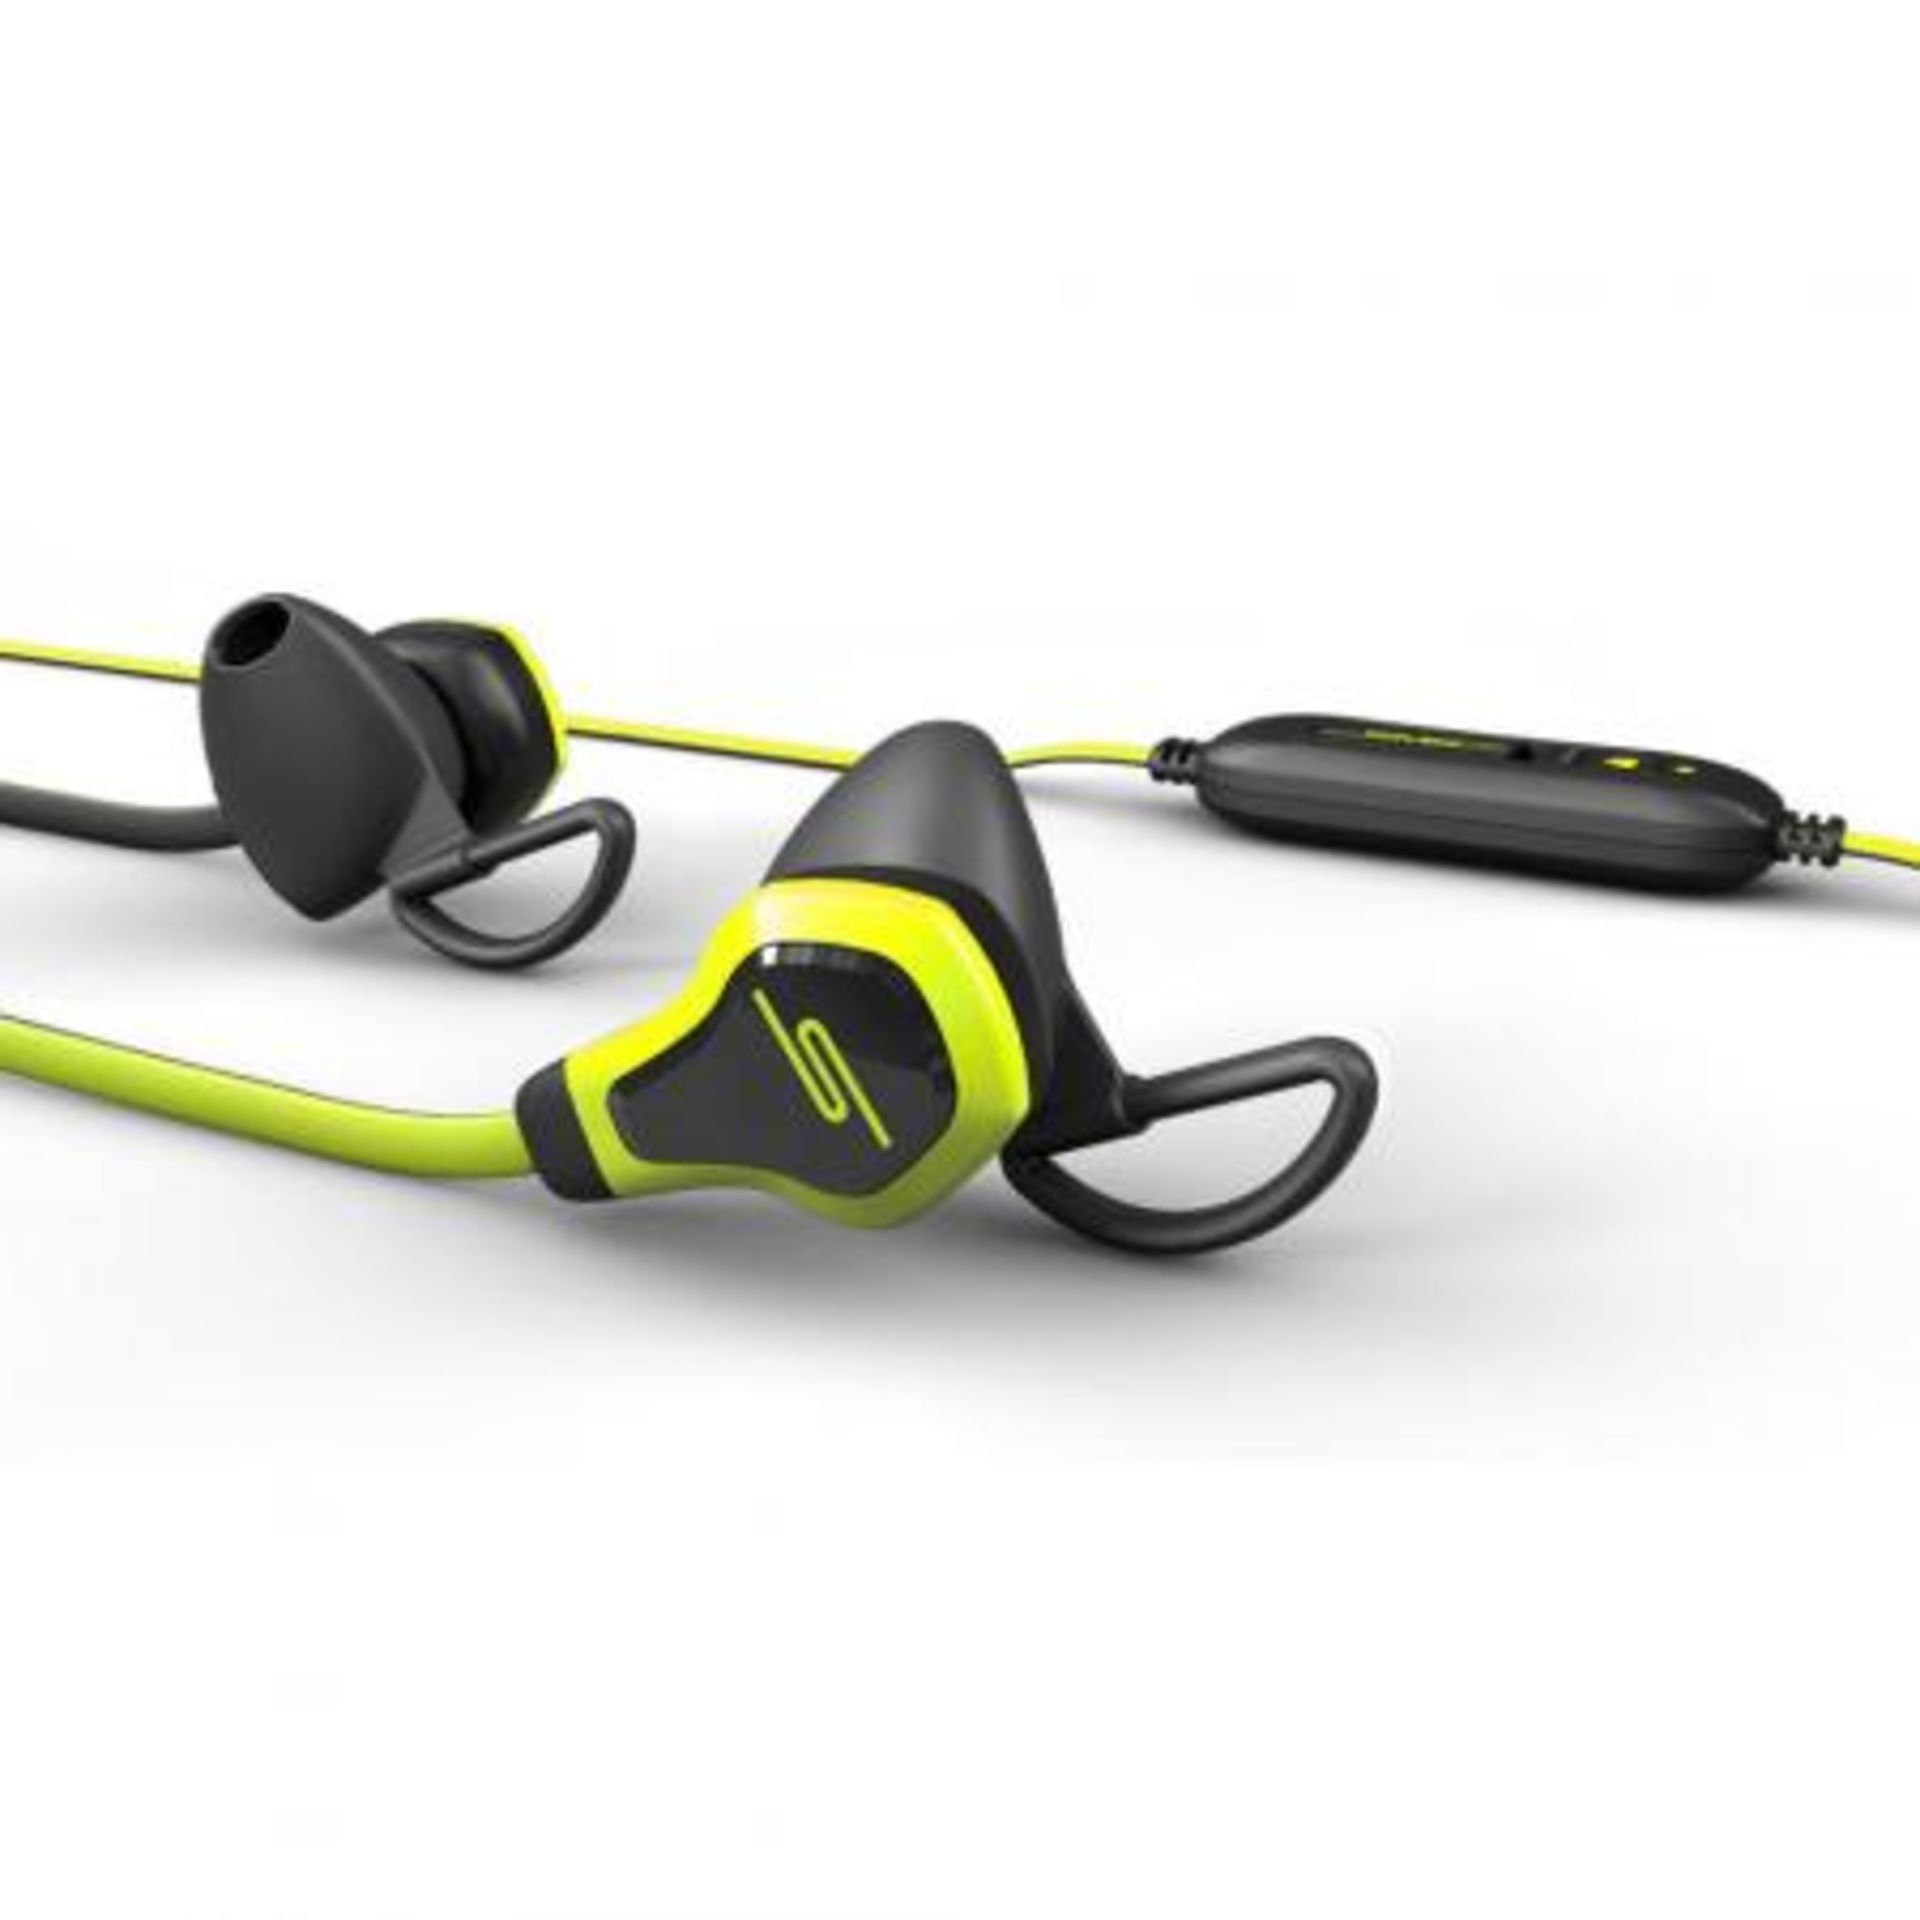 V Brand New SMS Audio BioSport Earphones - Heart Rate Monitor Measures Changes In Blood Flow - Smart - Image 3 of 5